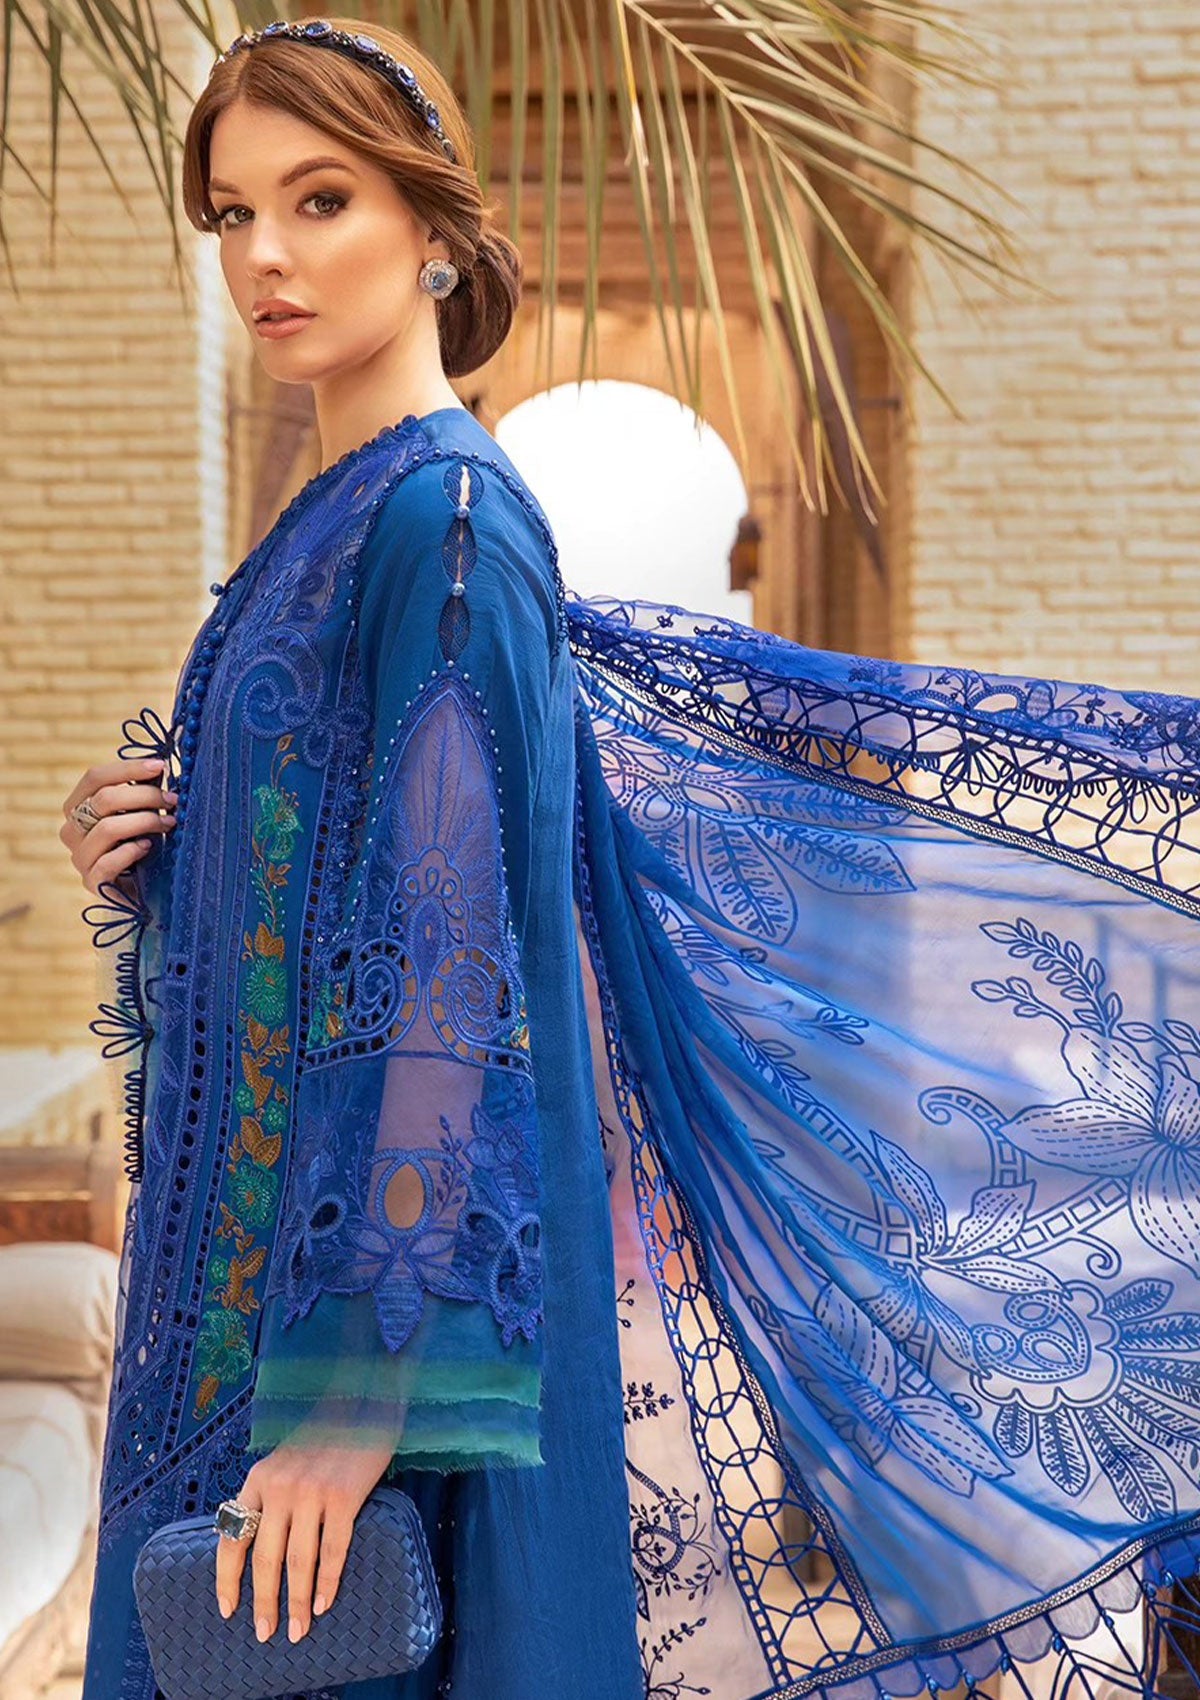 Lawn Collection - Maria B - Voyage a'Luxe - Luxury - MB24#04B